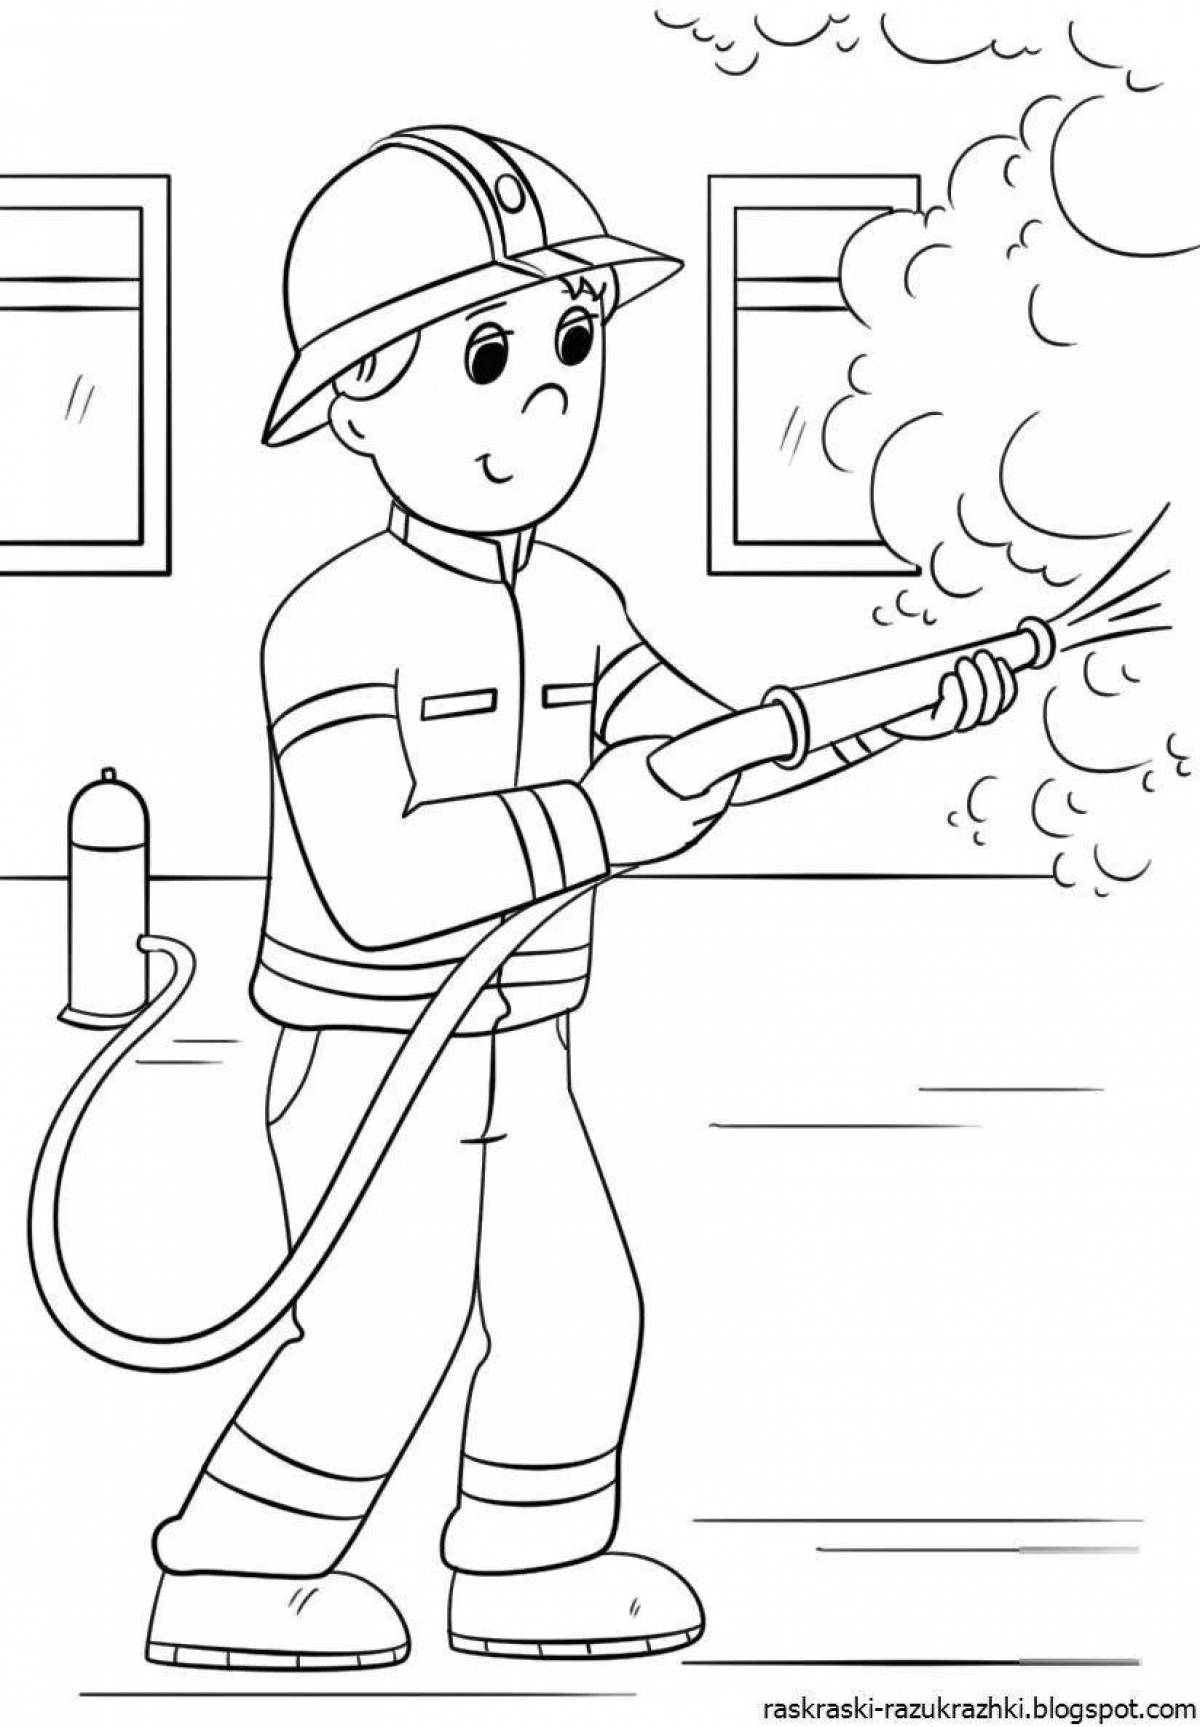 Unique fire safety coloring page